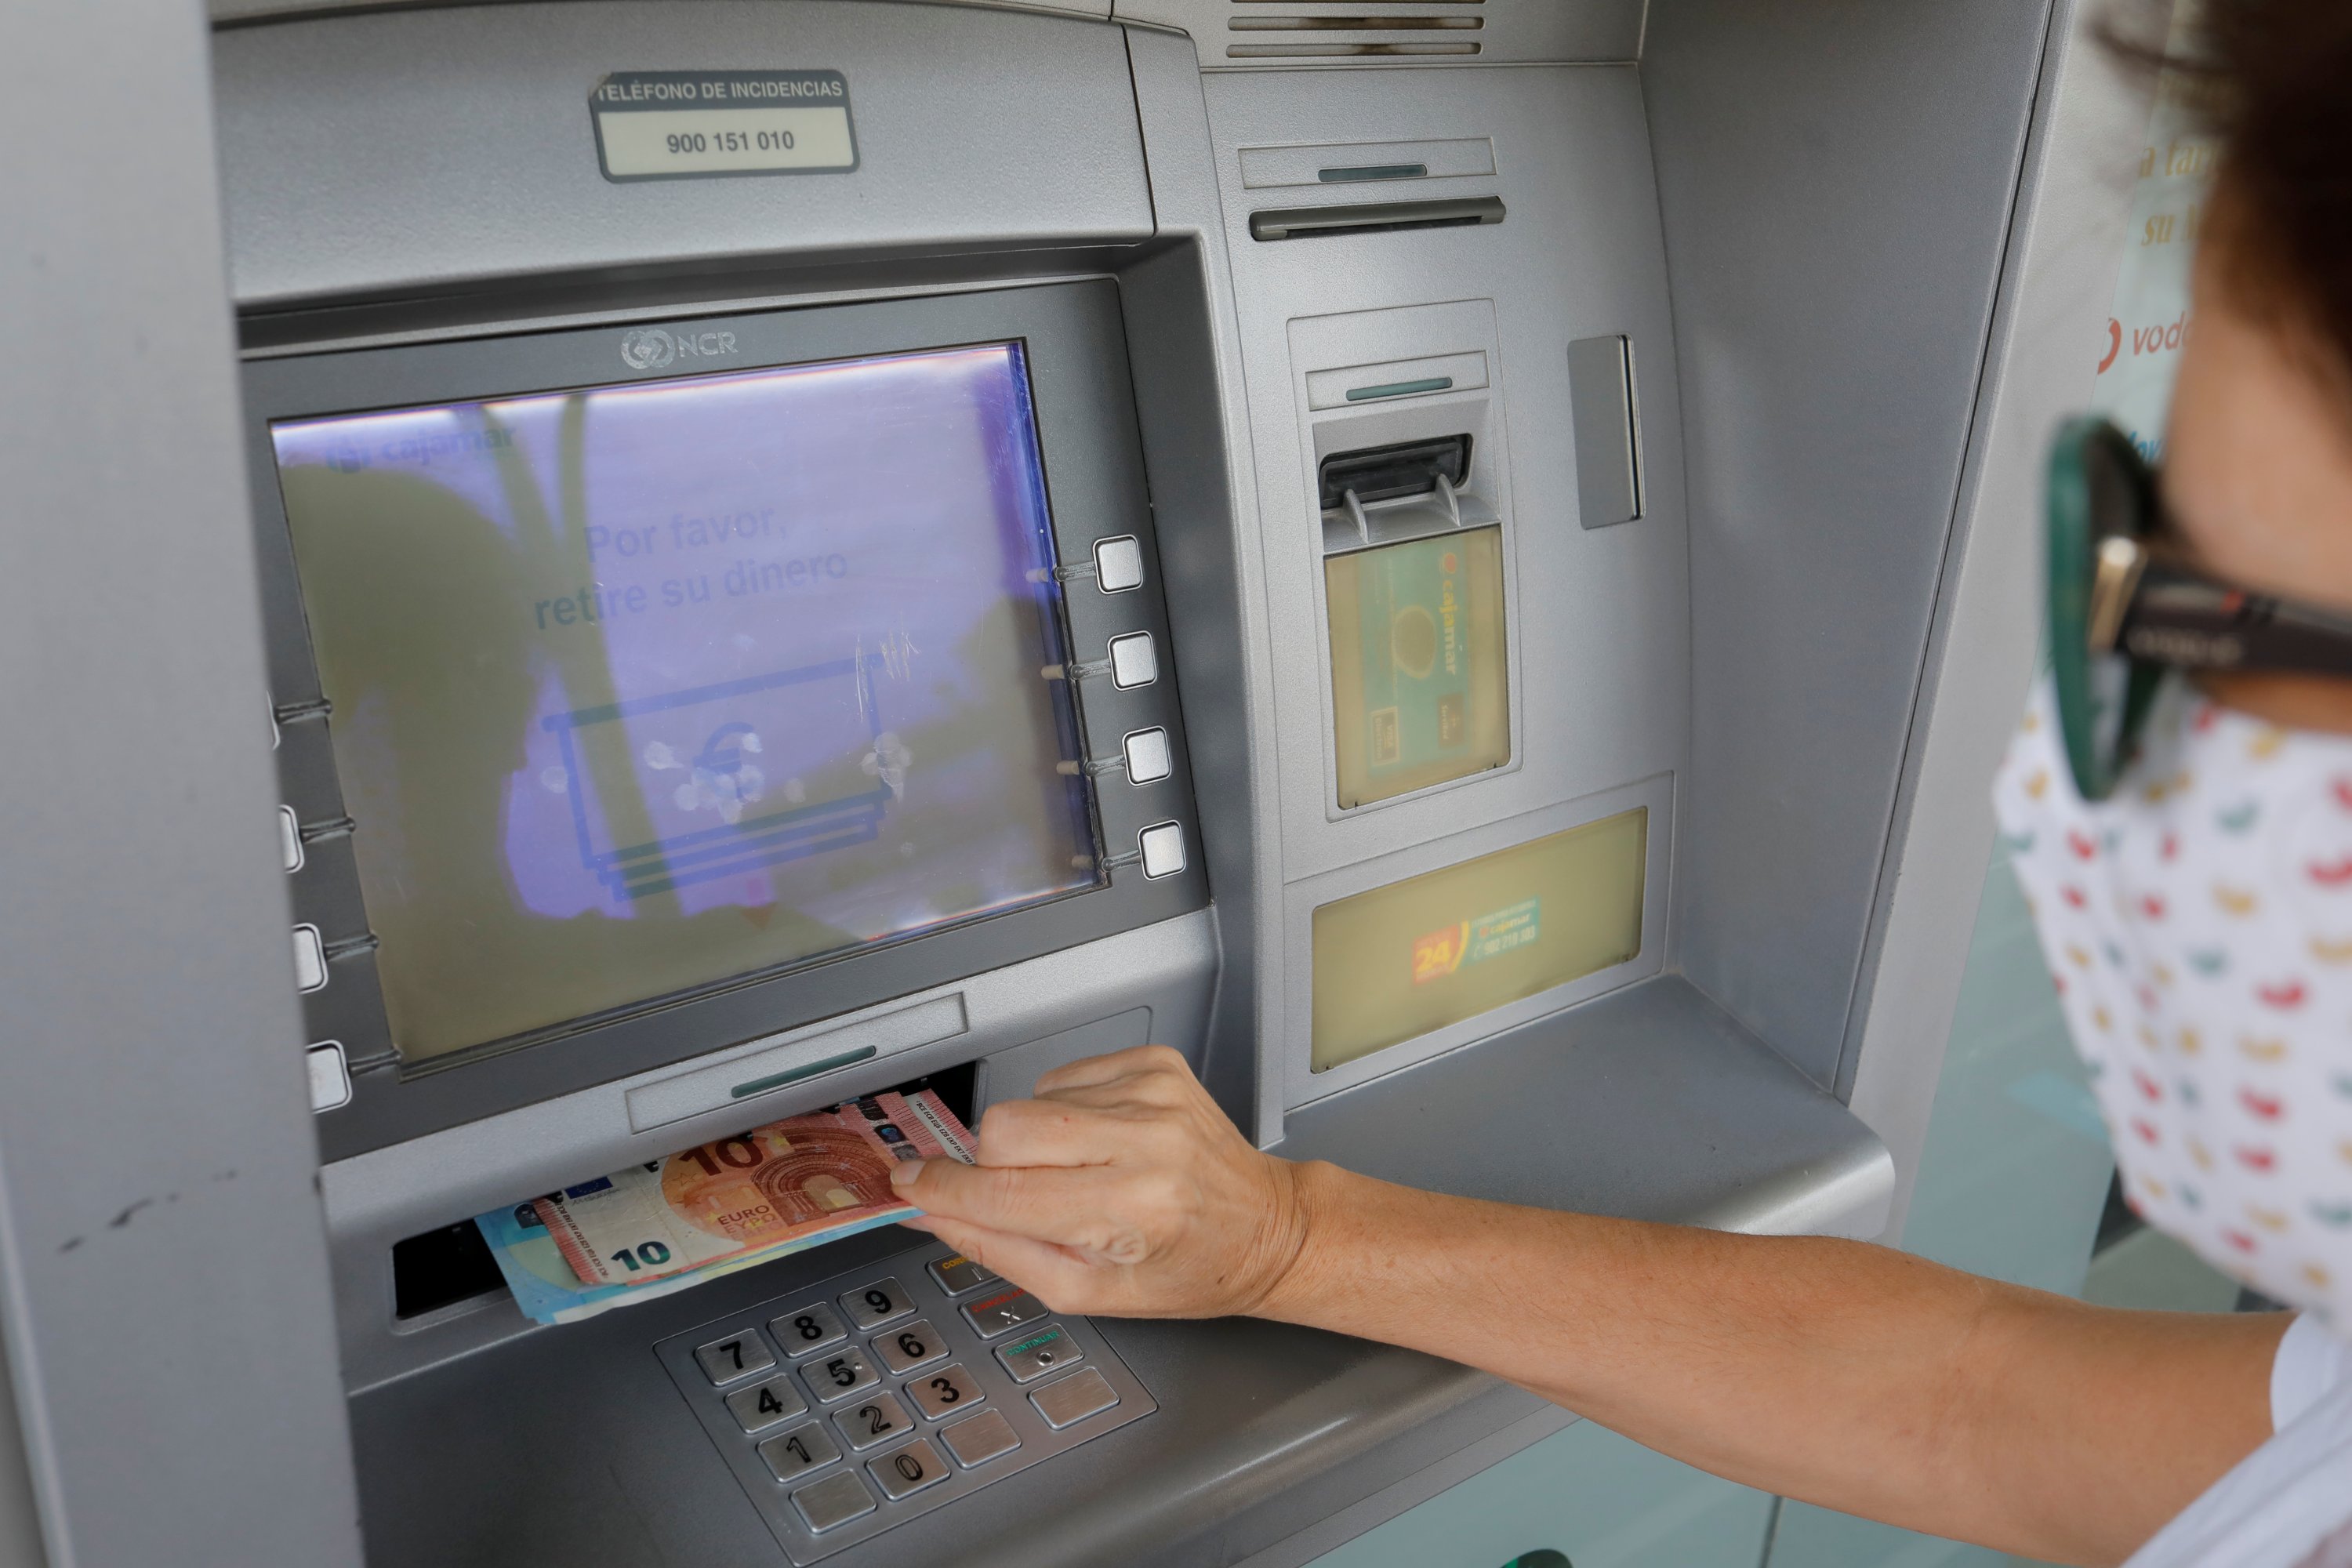 A woman wearing a protective mask withdraws Euro banknotes from an ATM machine at a Cajamar bank branch, amid the coronavirus disease (COVID-19) outbreak, in Ronda, southern Spain, October 9, 2020. (REUTERS Photo)